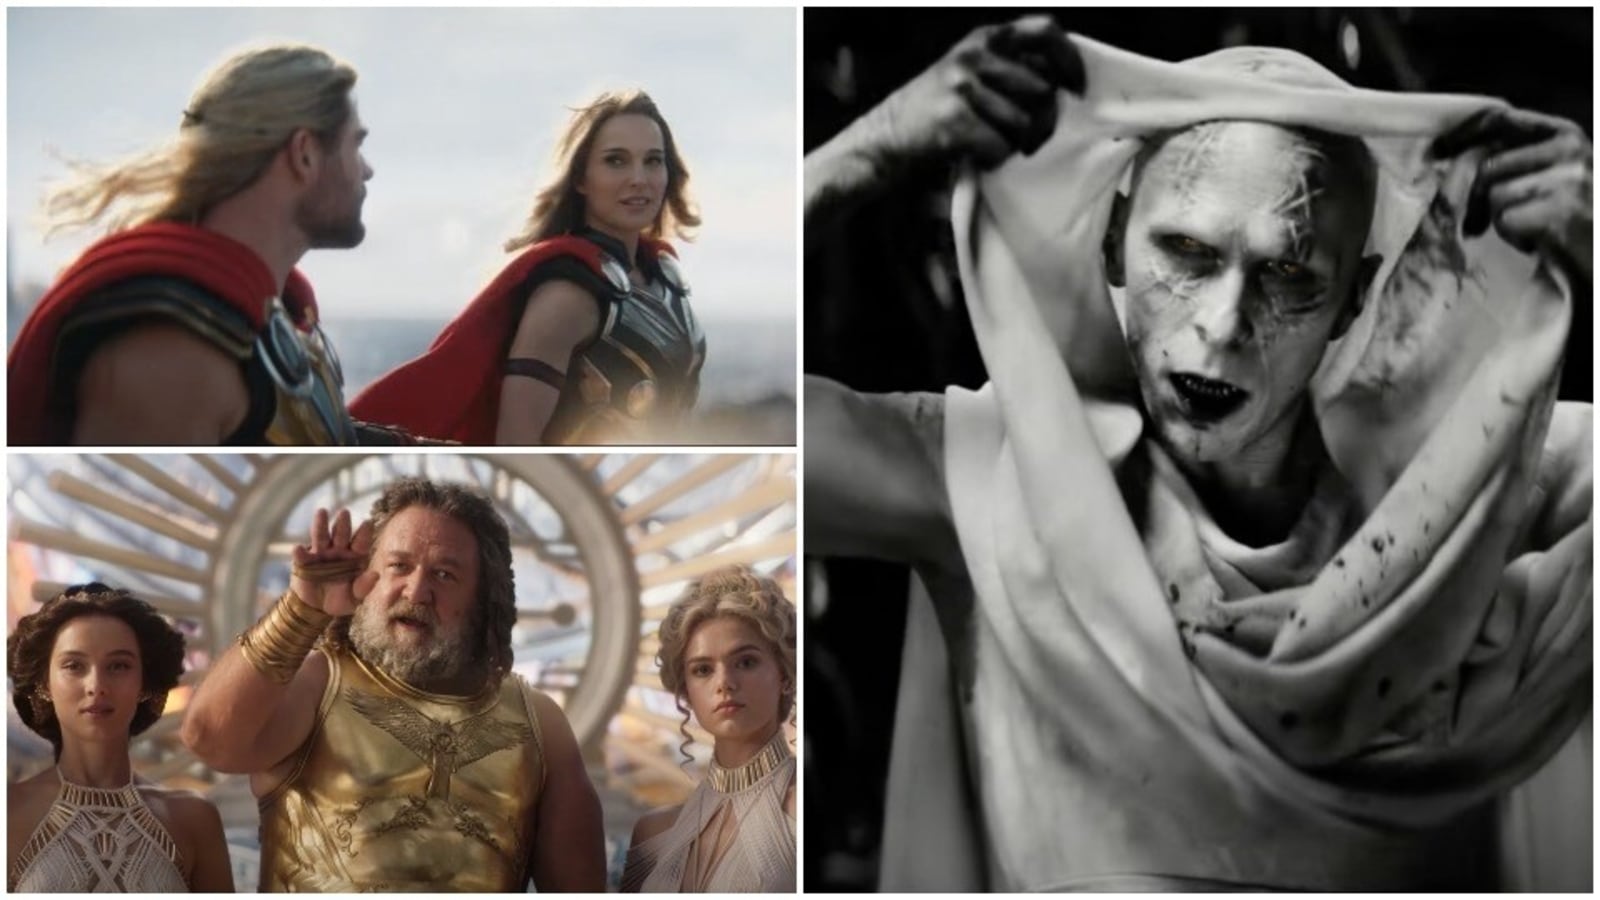 Thor: Love and Thunder Trailer Features the First Look at Christian Bale's  Gorr the God Butcher